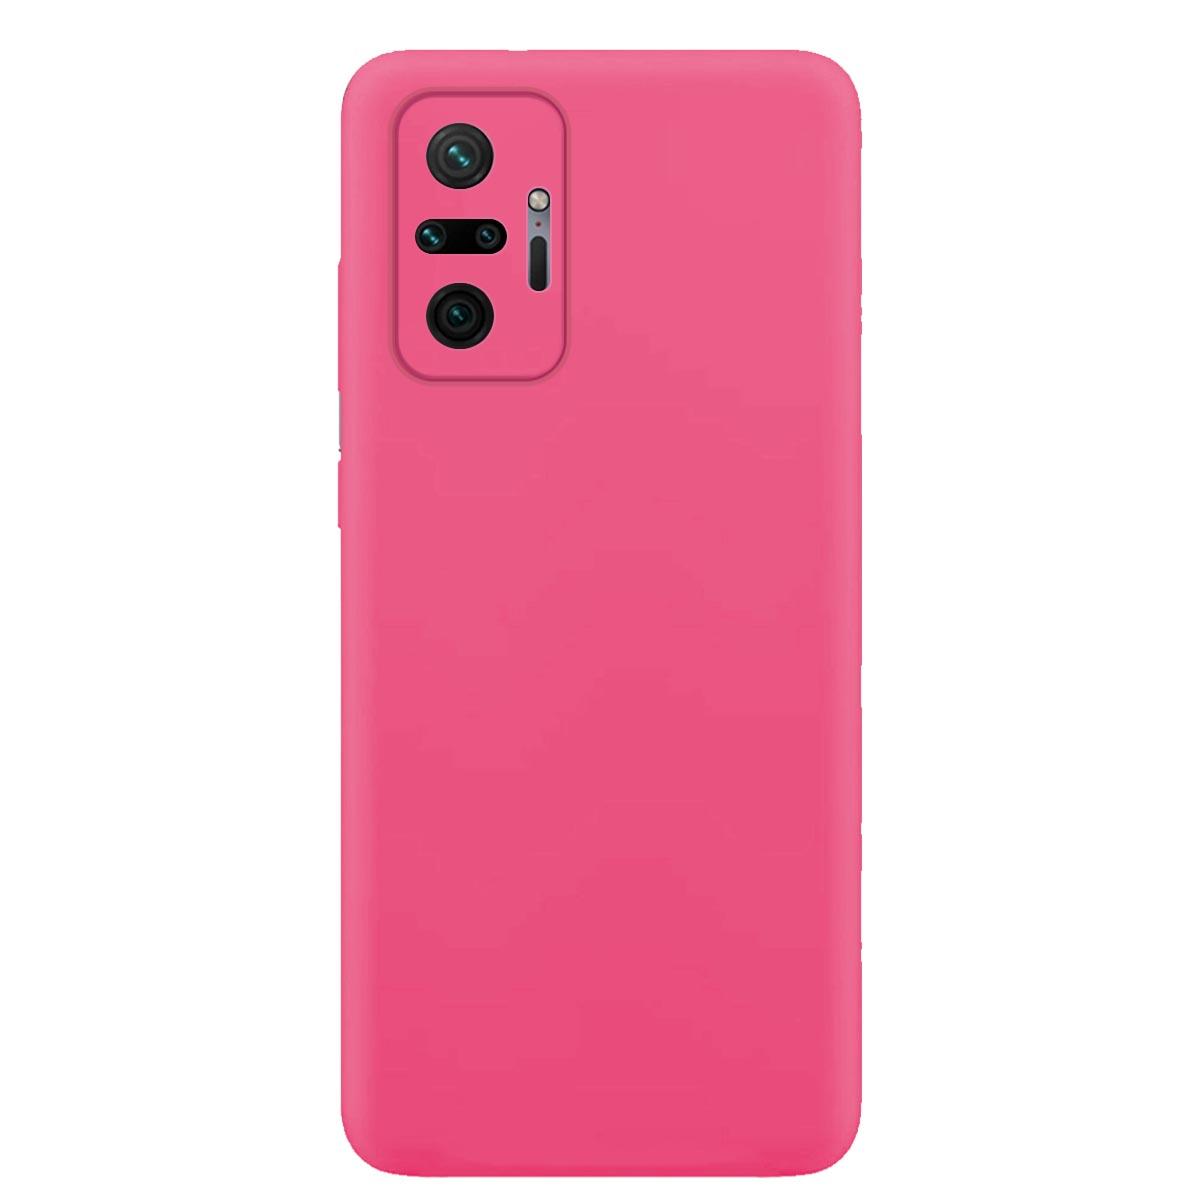 MTB MORE Redmi Pink Hot Pro, ENERGY Xiaomi, Case, 10 Backcover, Pro Note Max, Silikon Soft Note 10 Redmi